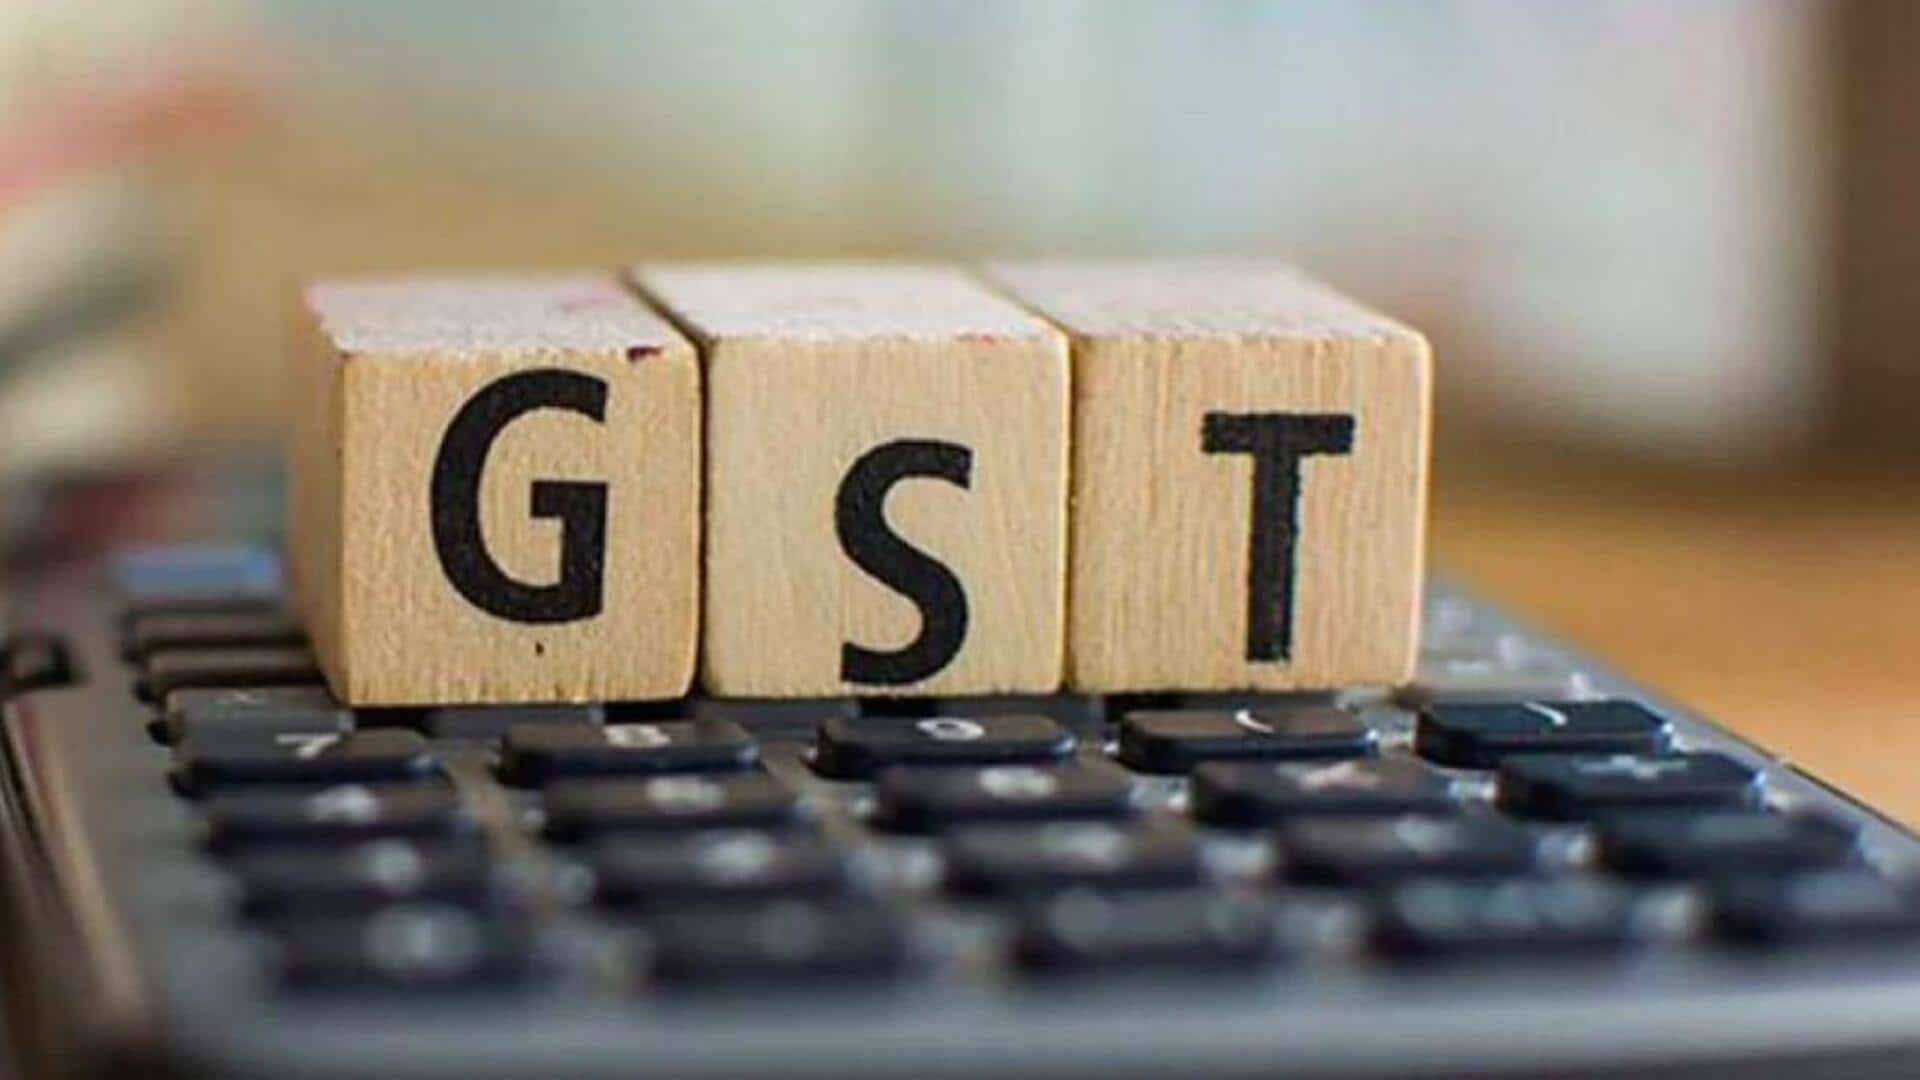 February GST collections rise 12.5% YoY to Rs. 1.68L crore